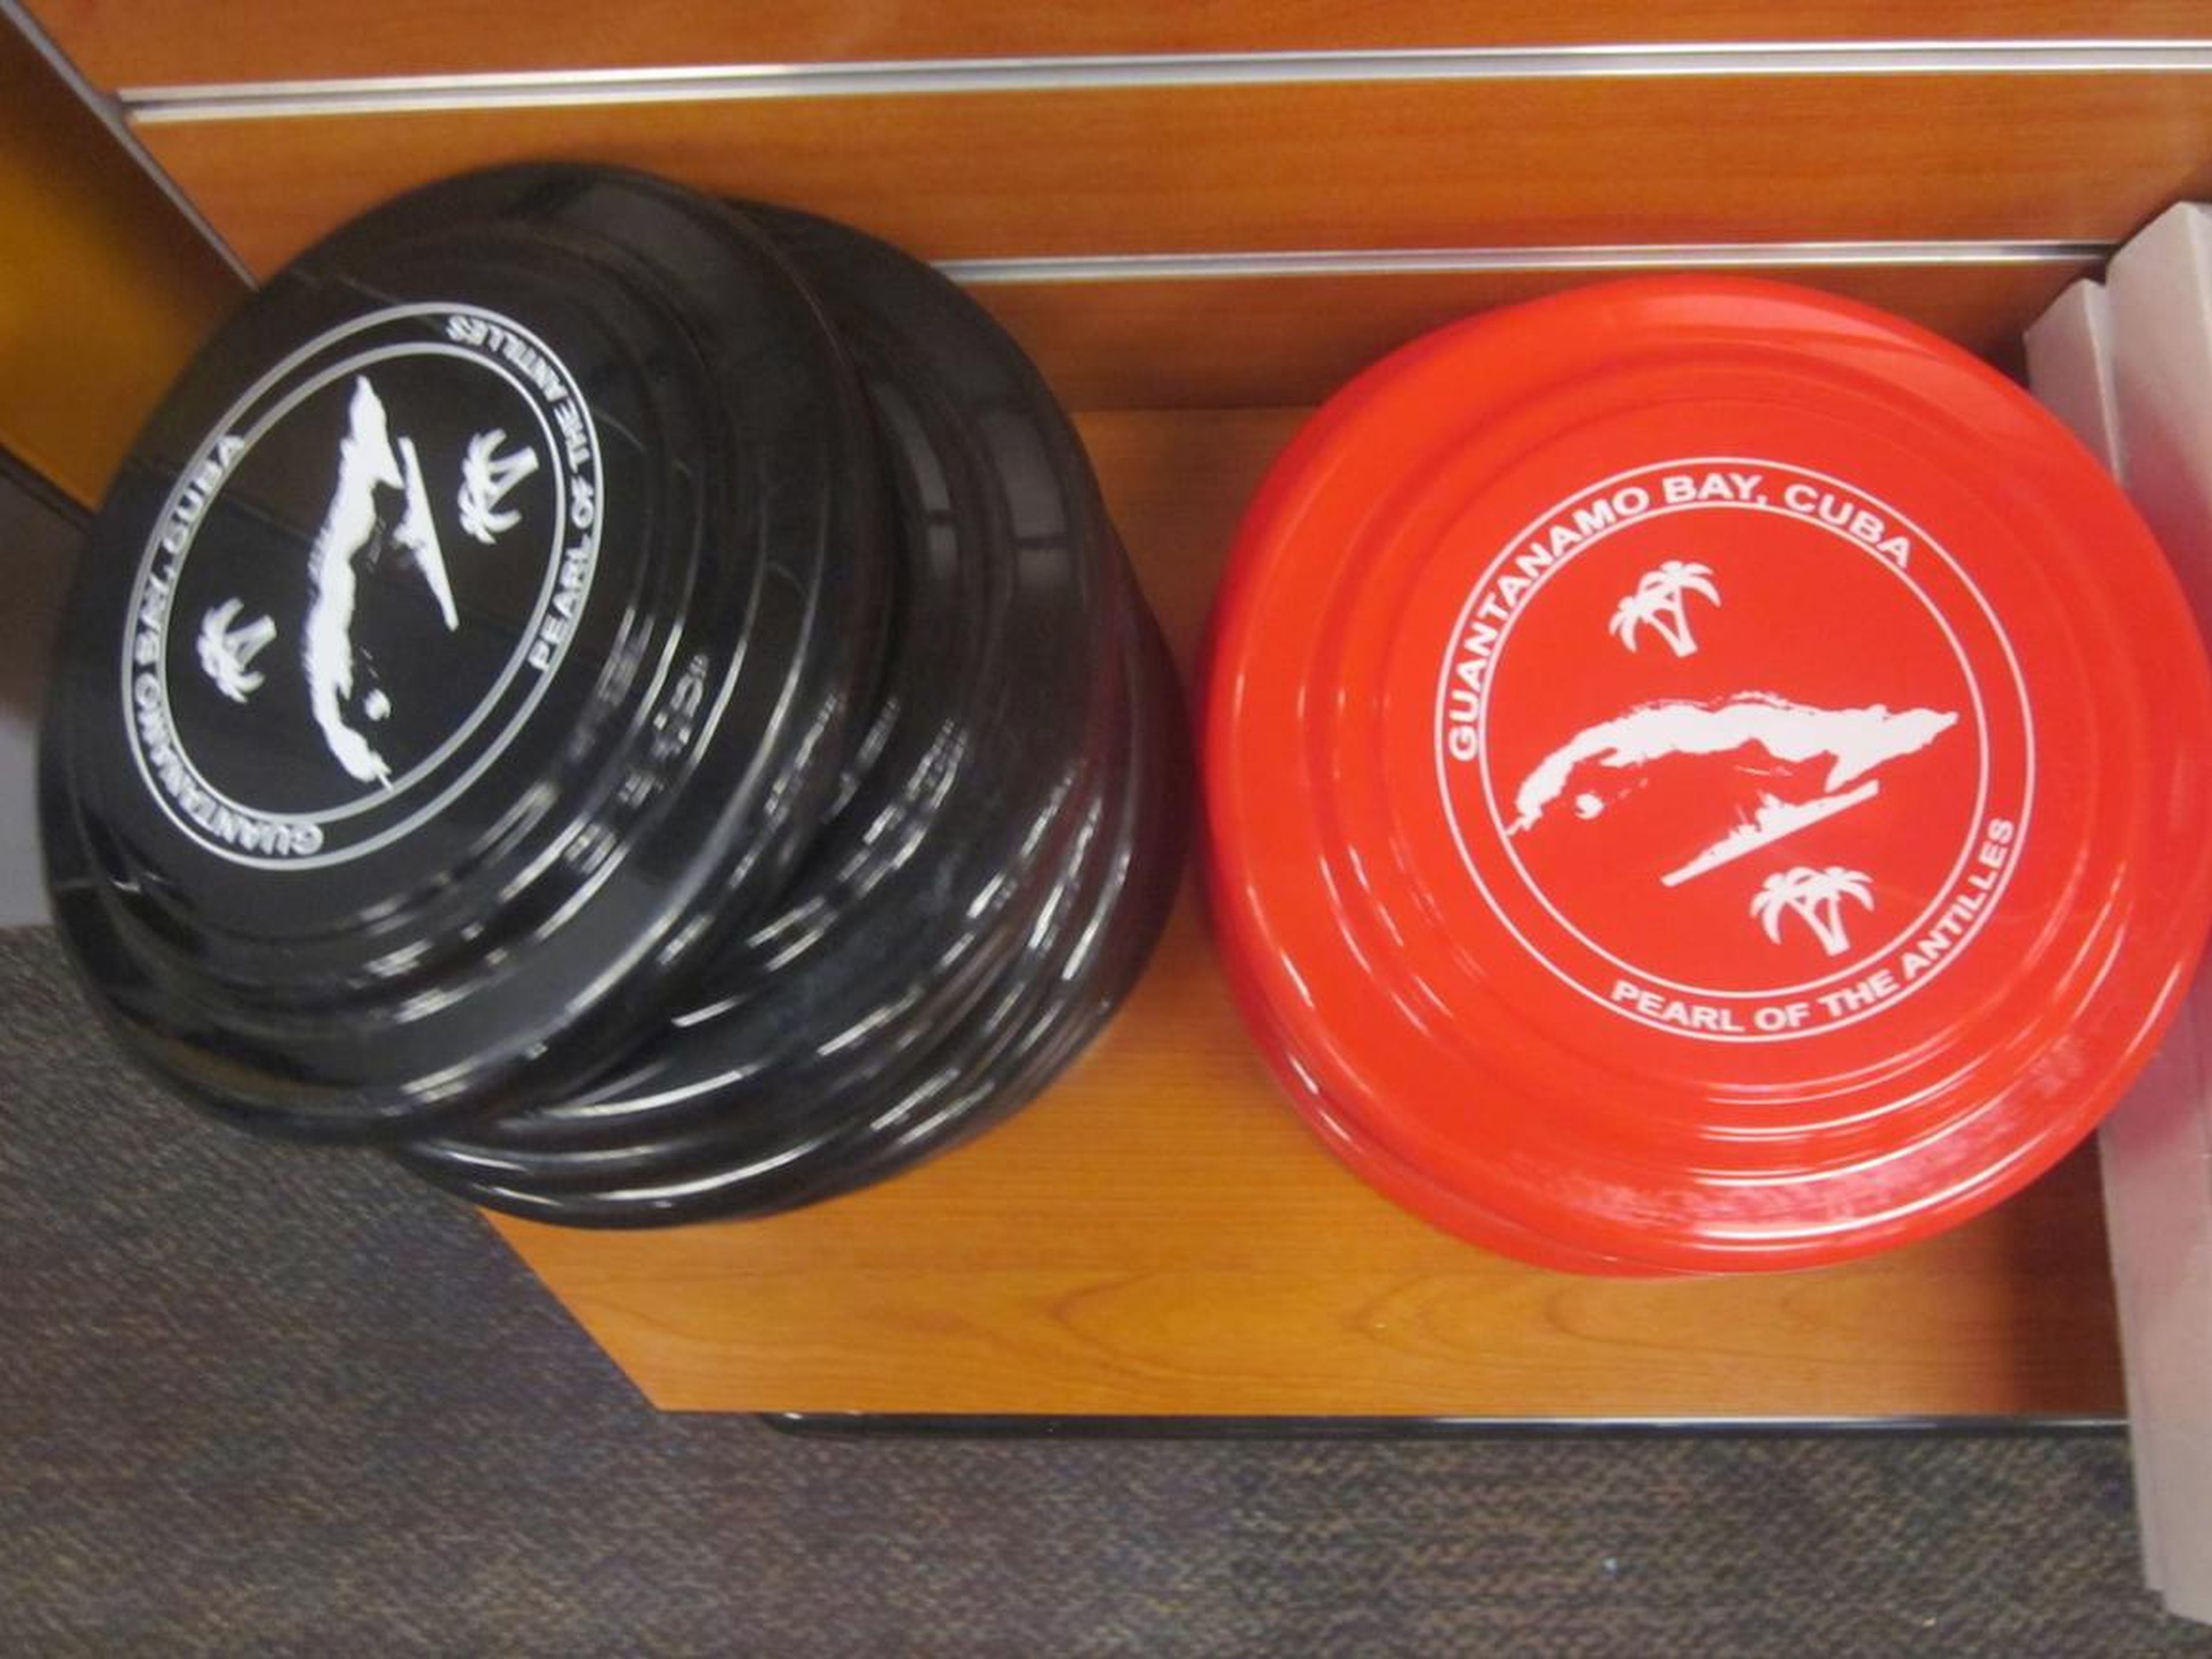 Elsewhere in the shop, you can also find branded Frisbee-style discs ...